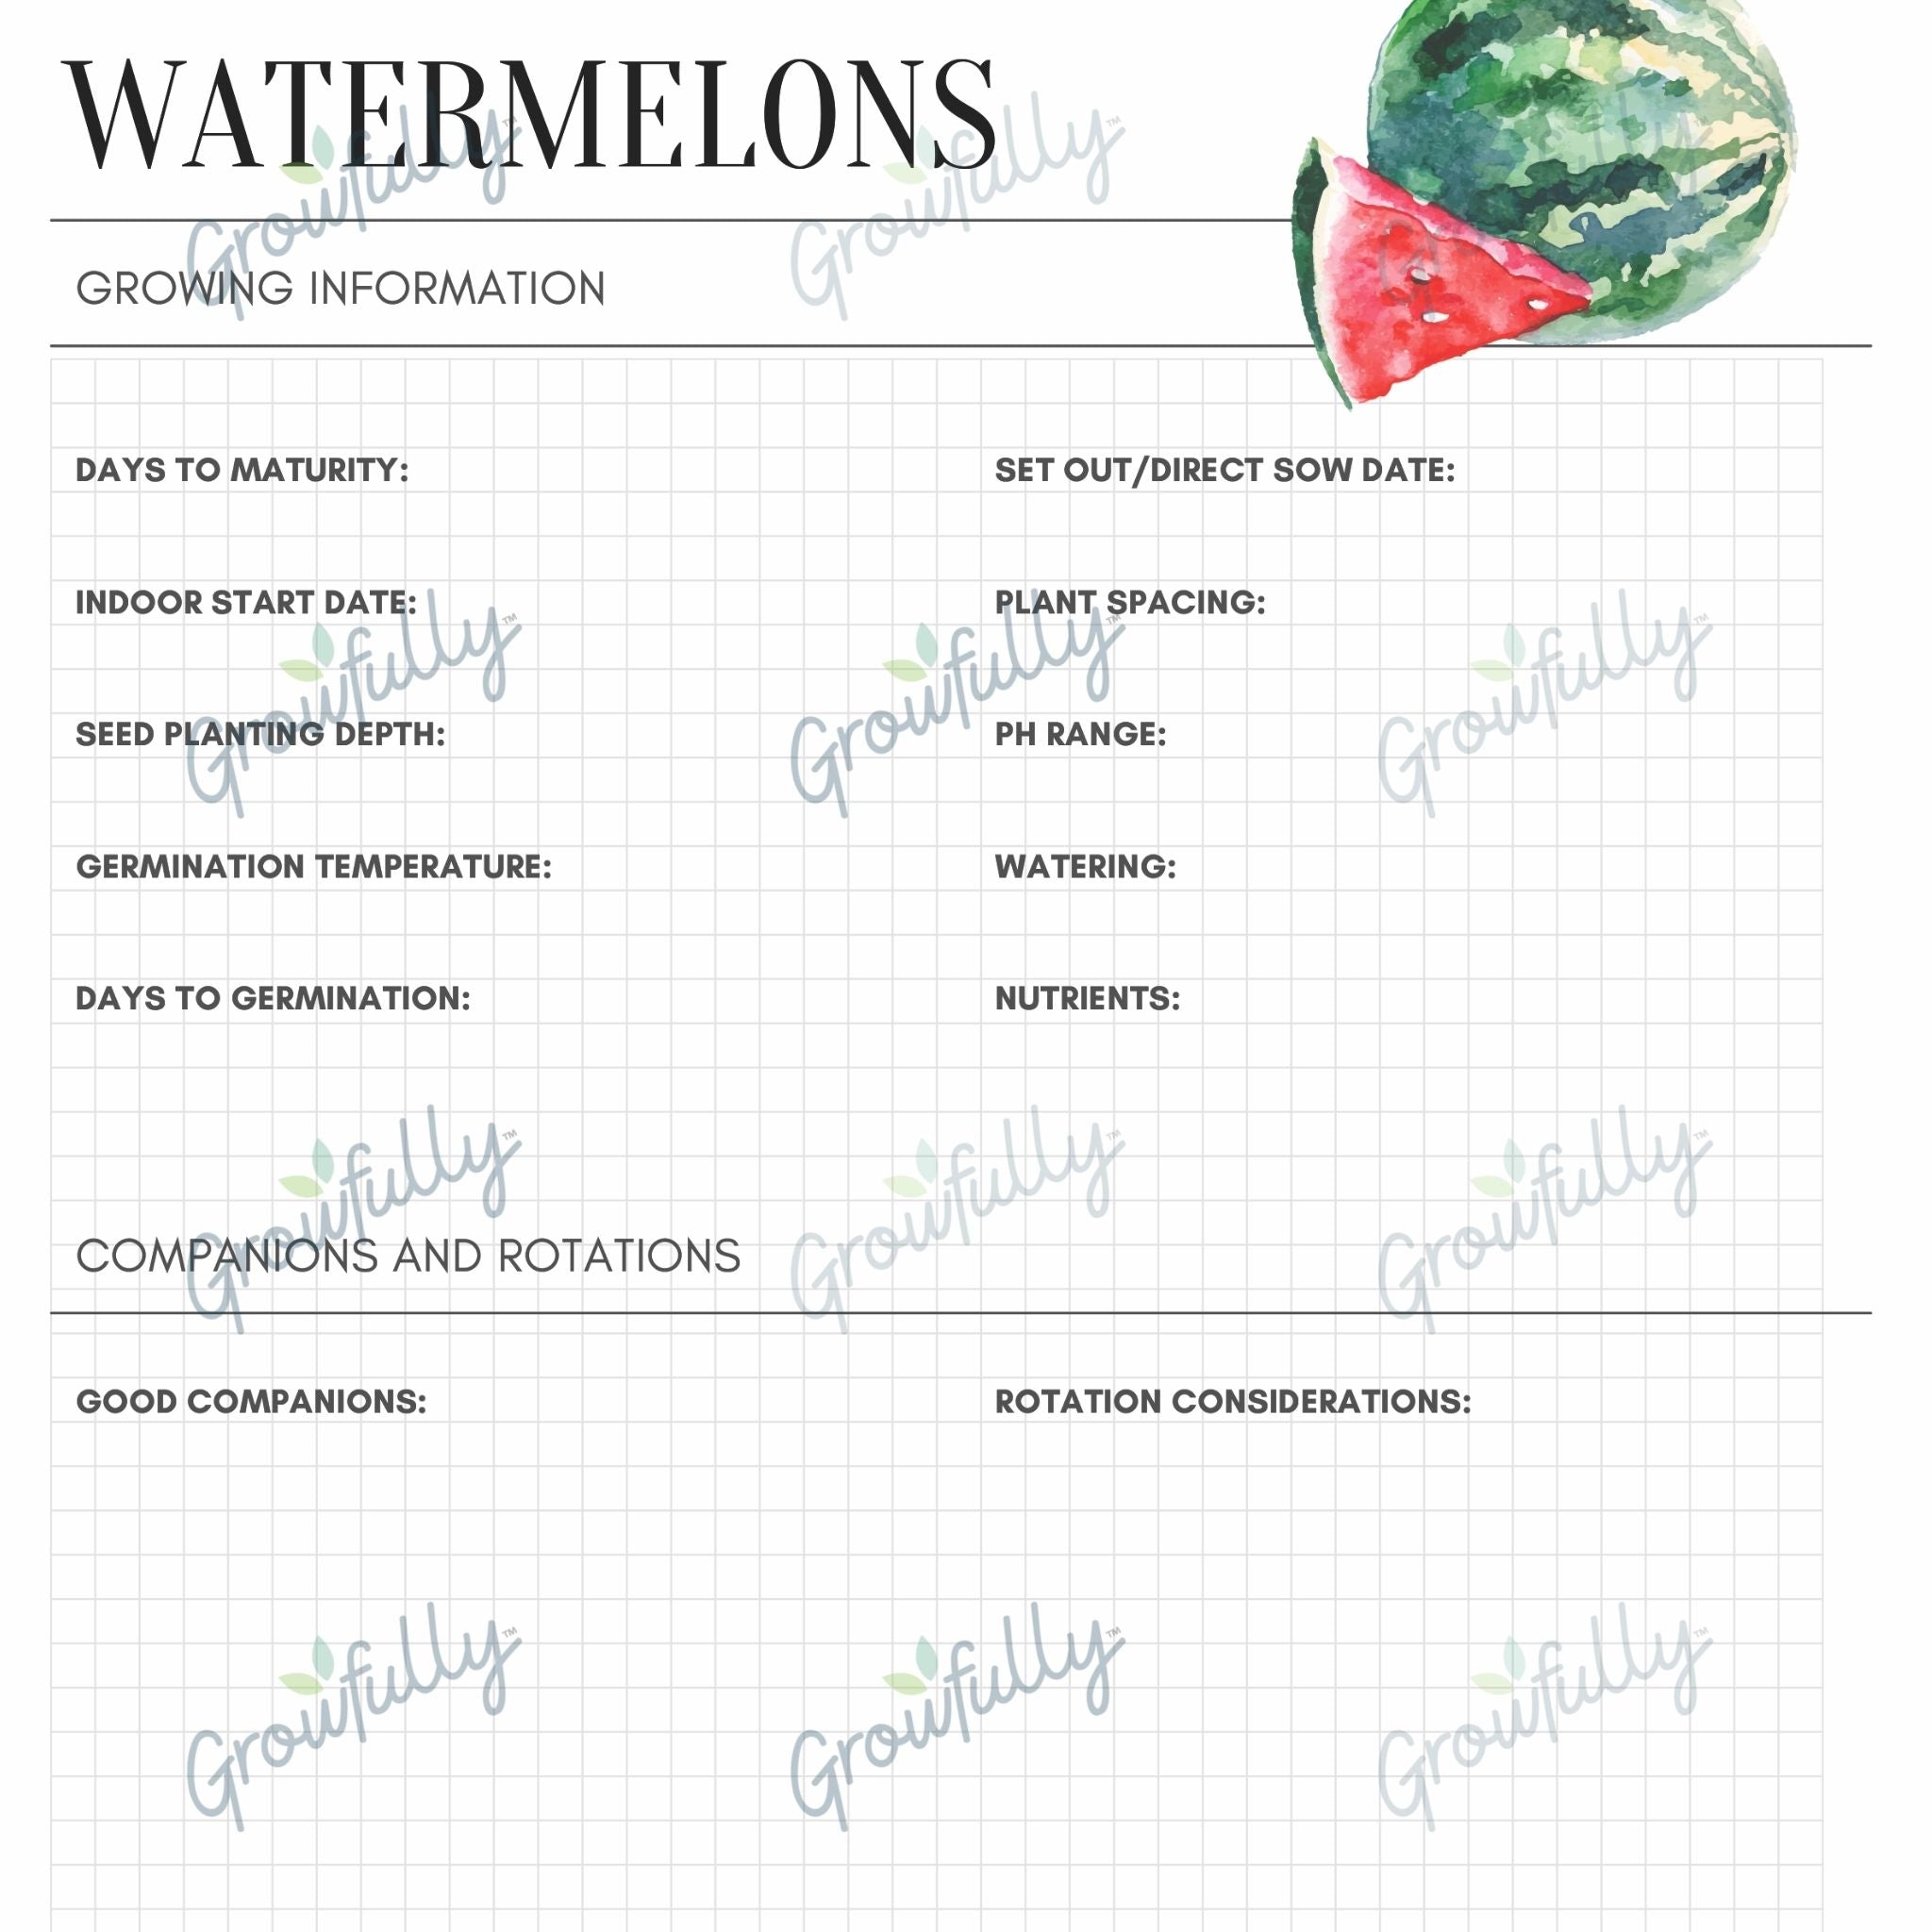 A sample of the Watermelons Growing Information printable page